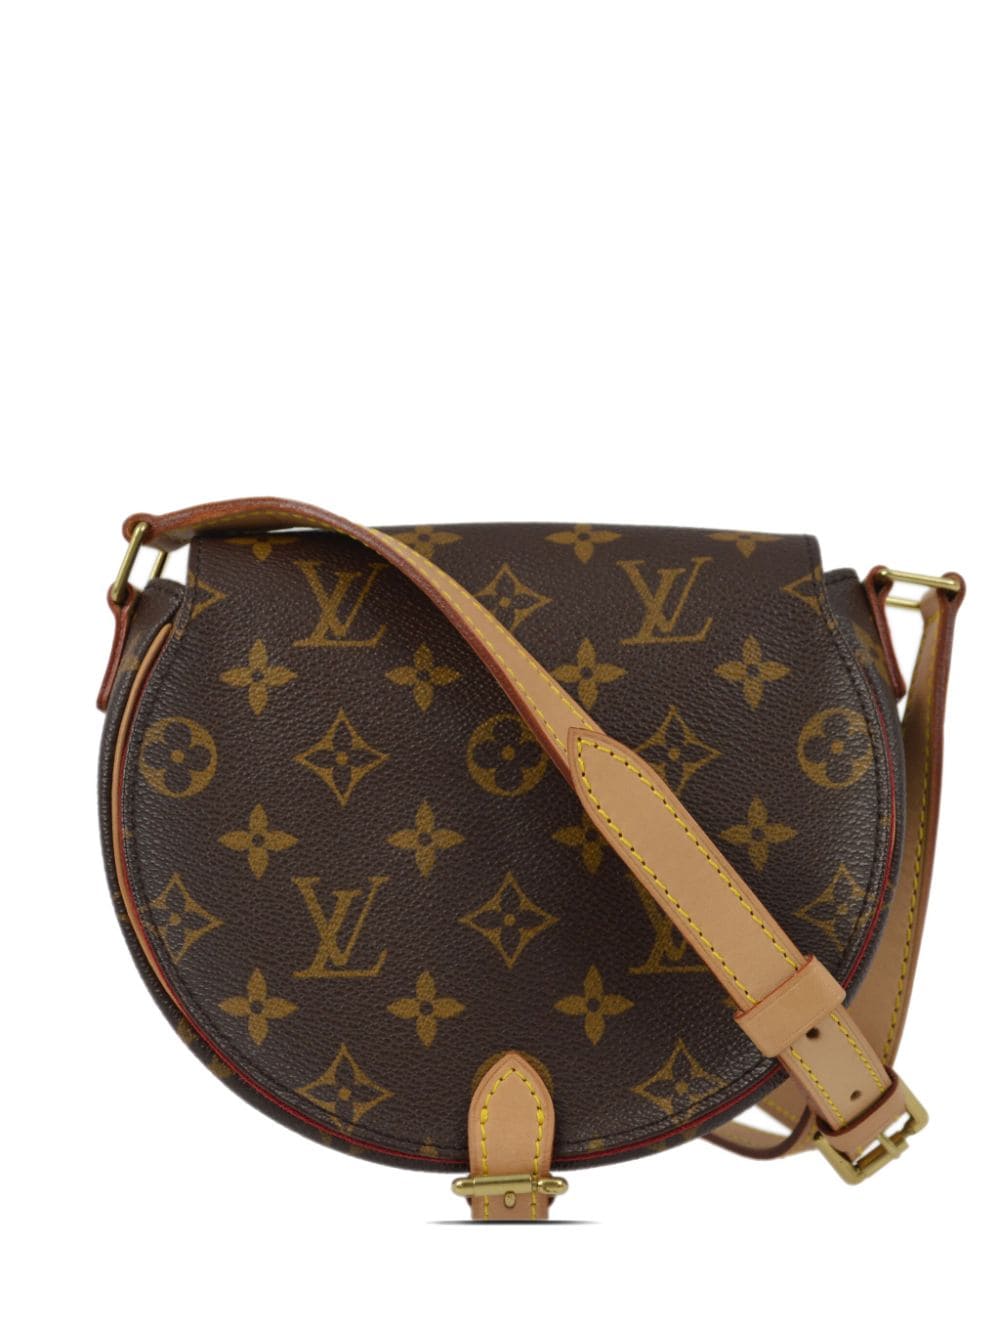 Pre-owned Louis Vuitton 2004 Tambourine Shoulder Bag In Brown